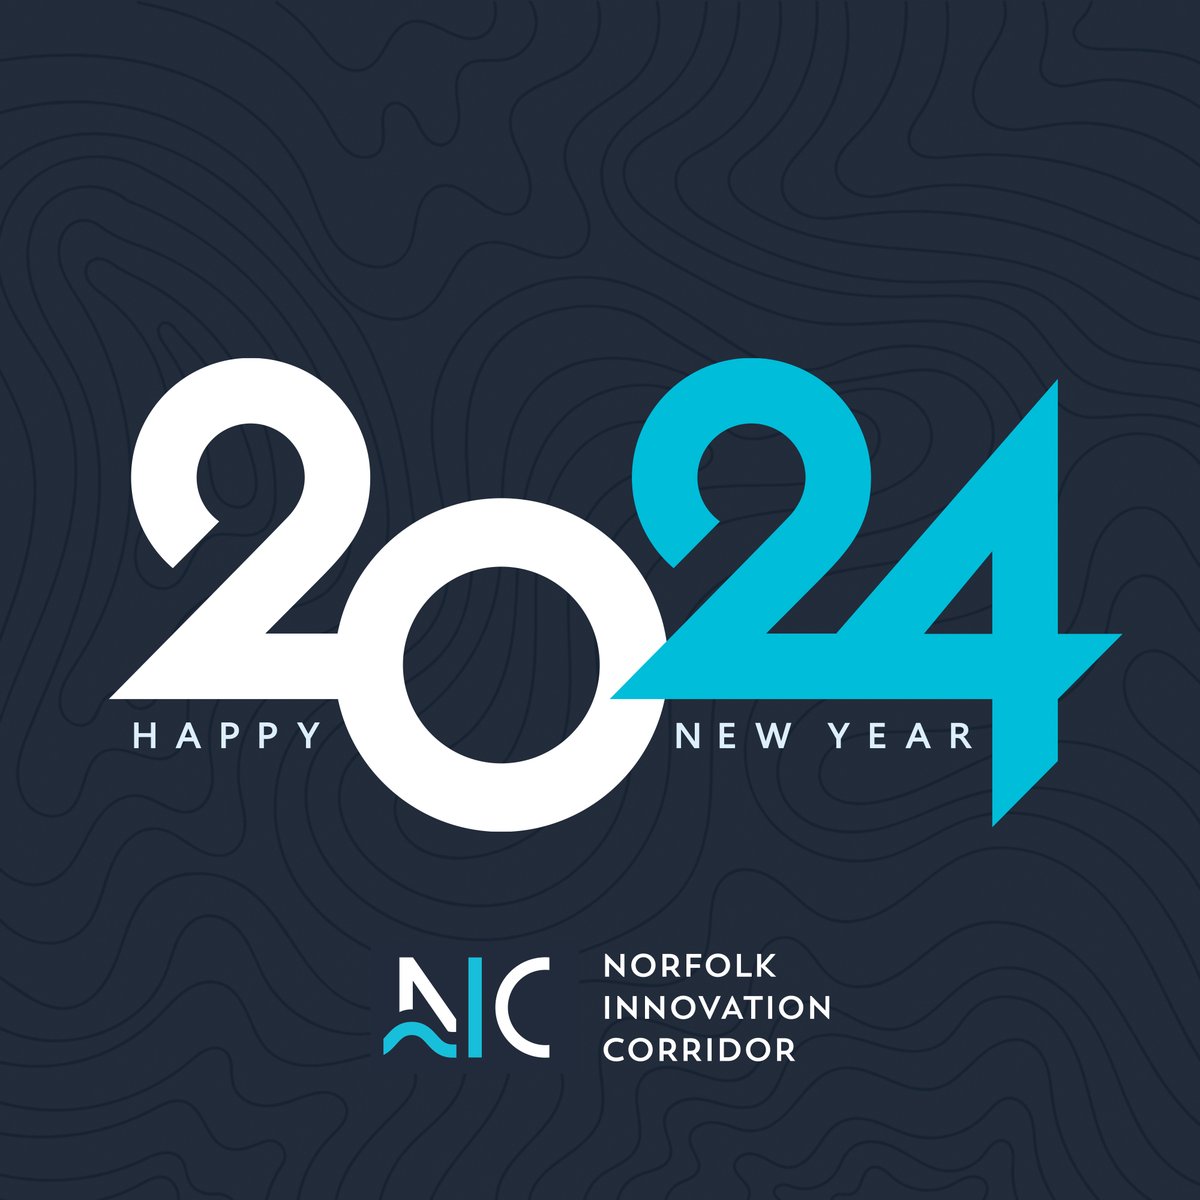 Happy New Year from the Norfolk Innovation Corridor! ✨🎆

#CheersTo2024 #happynewyear #innovation #innovate #innovationdistrict